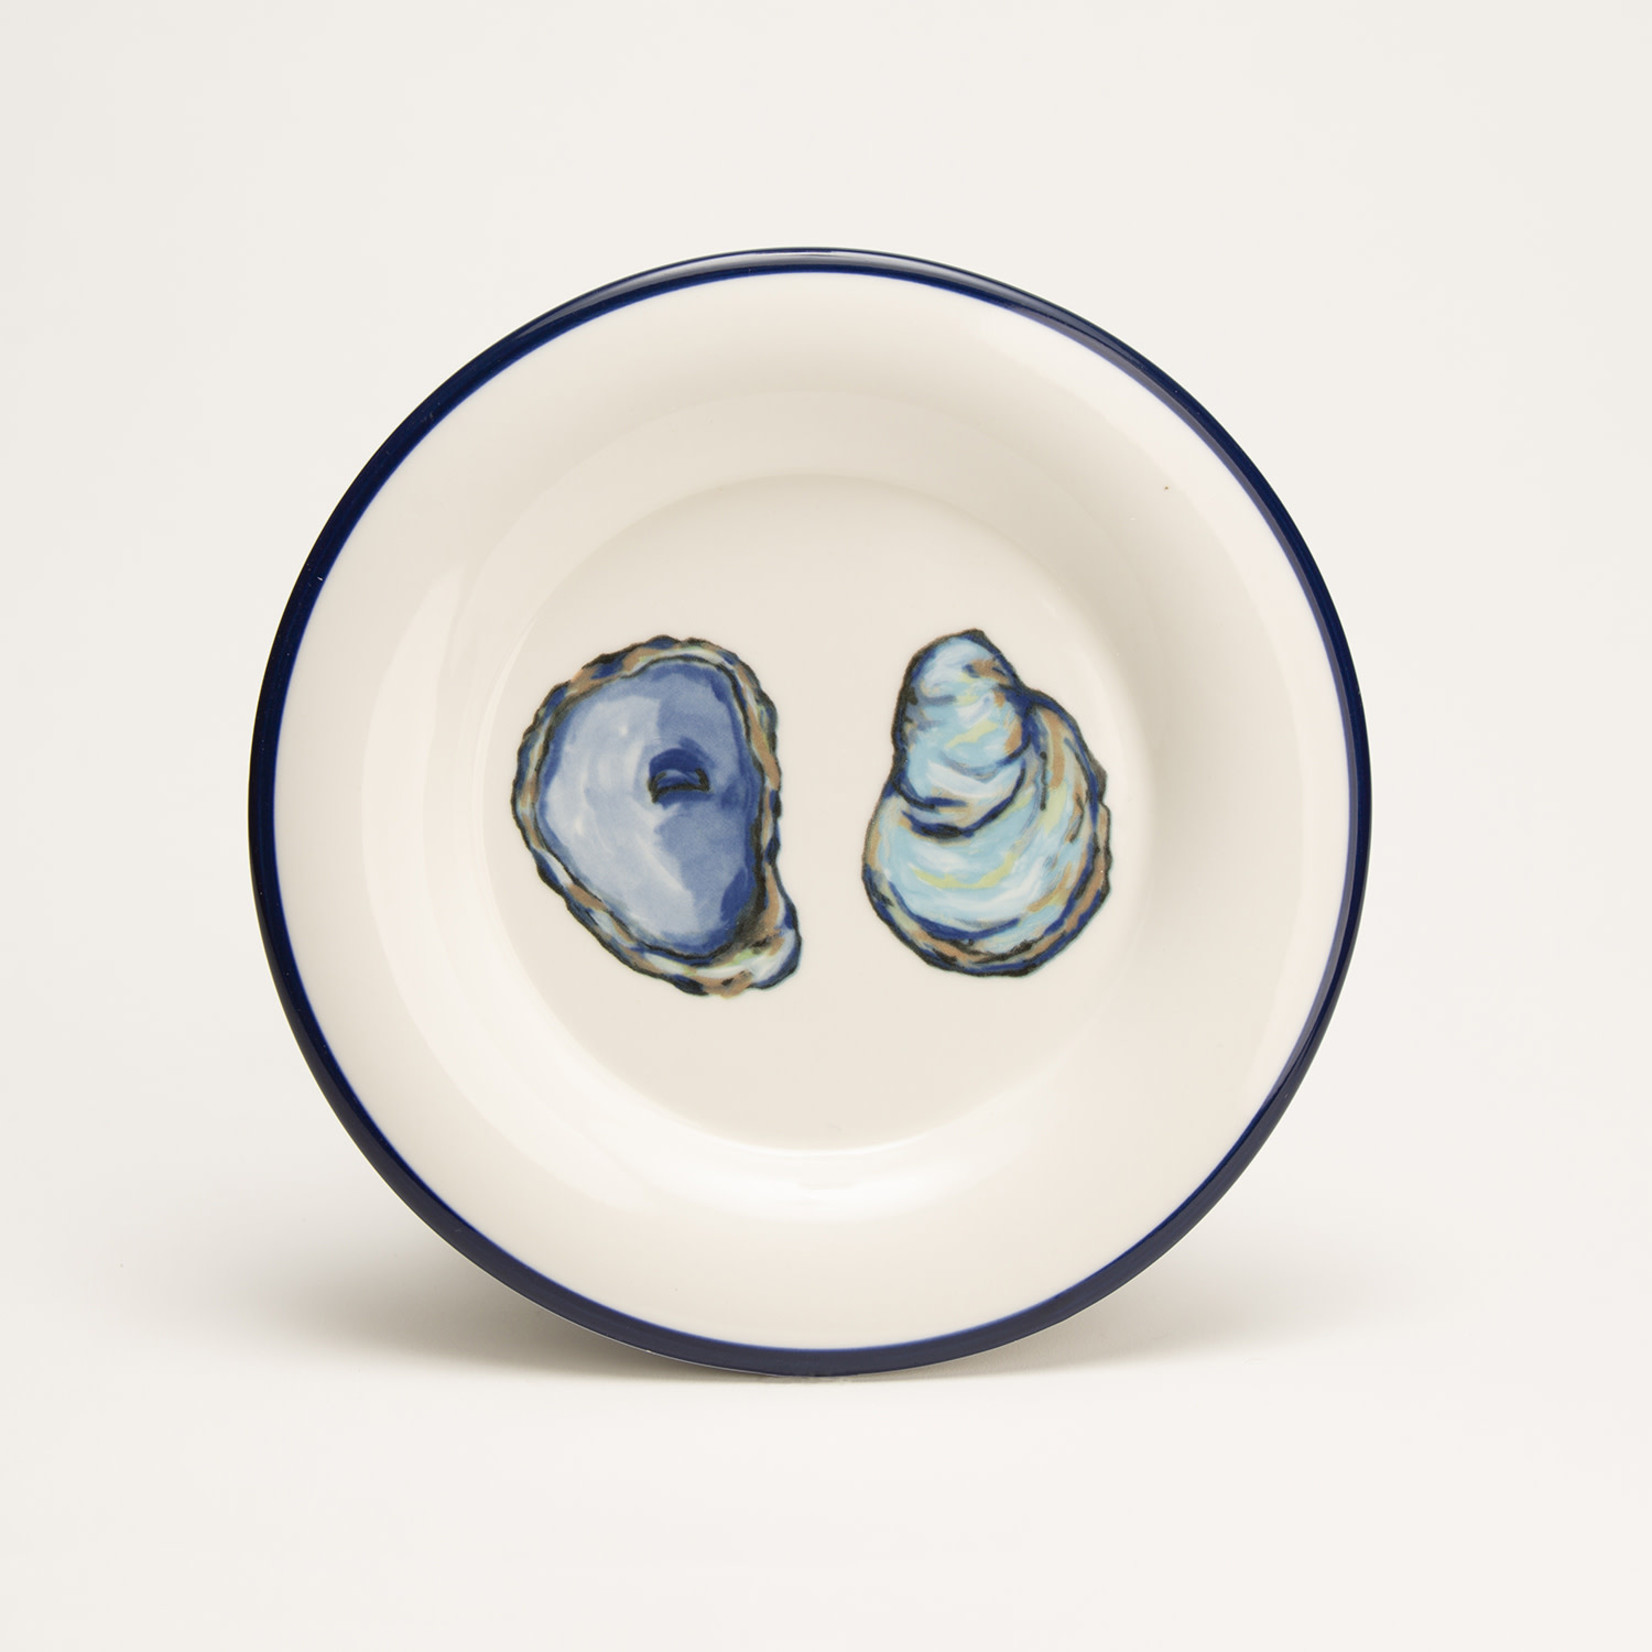 7.5" Round Plate - Oyster